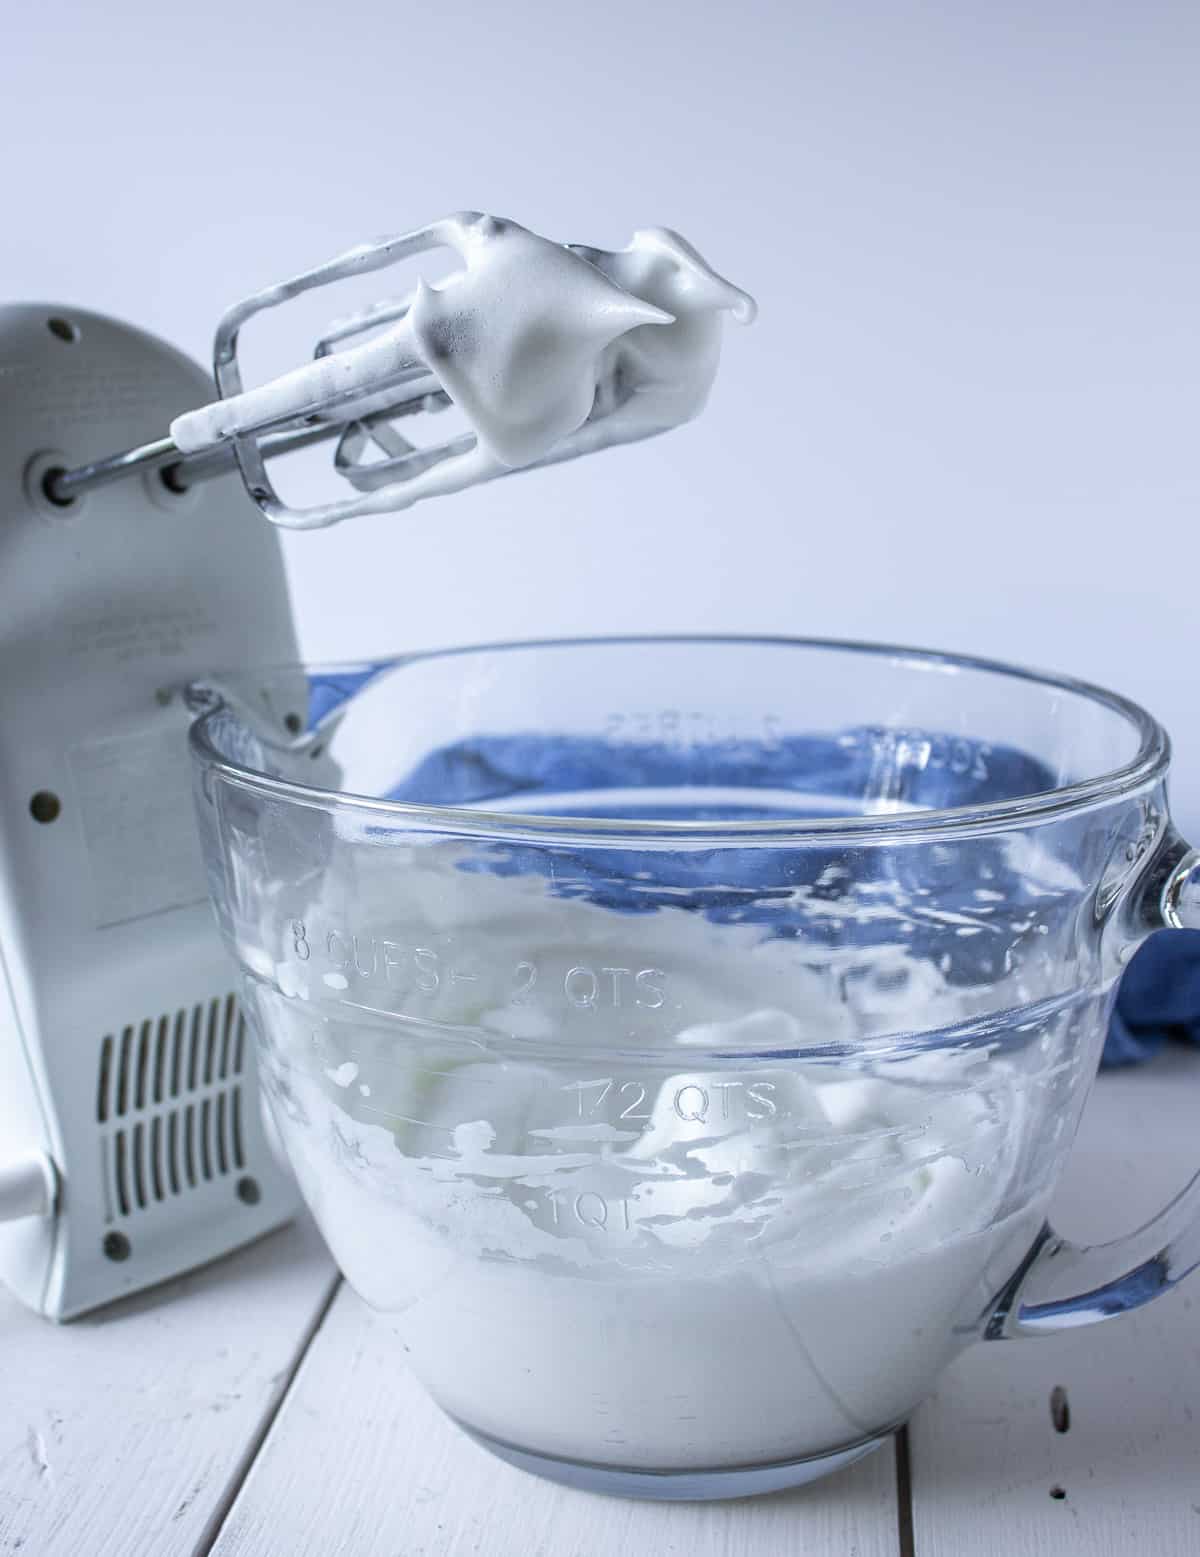 A glass bowl filled with whipped egg whites next to a hand held mixer.